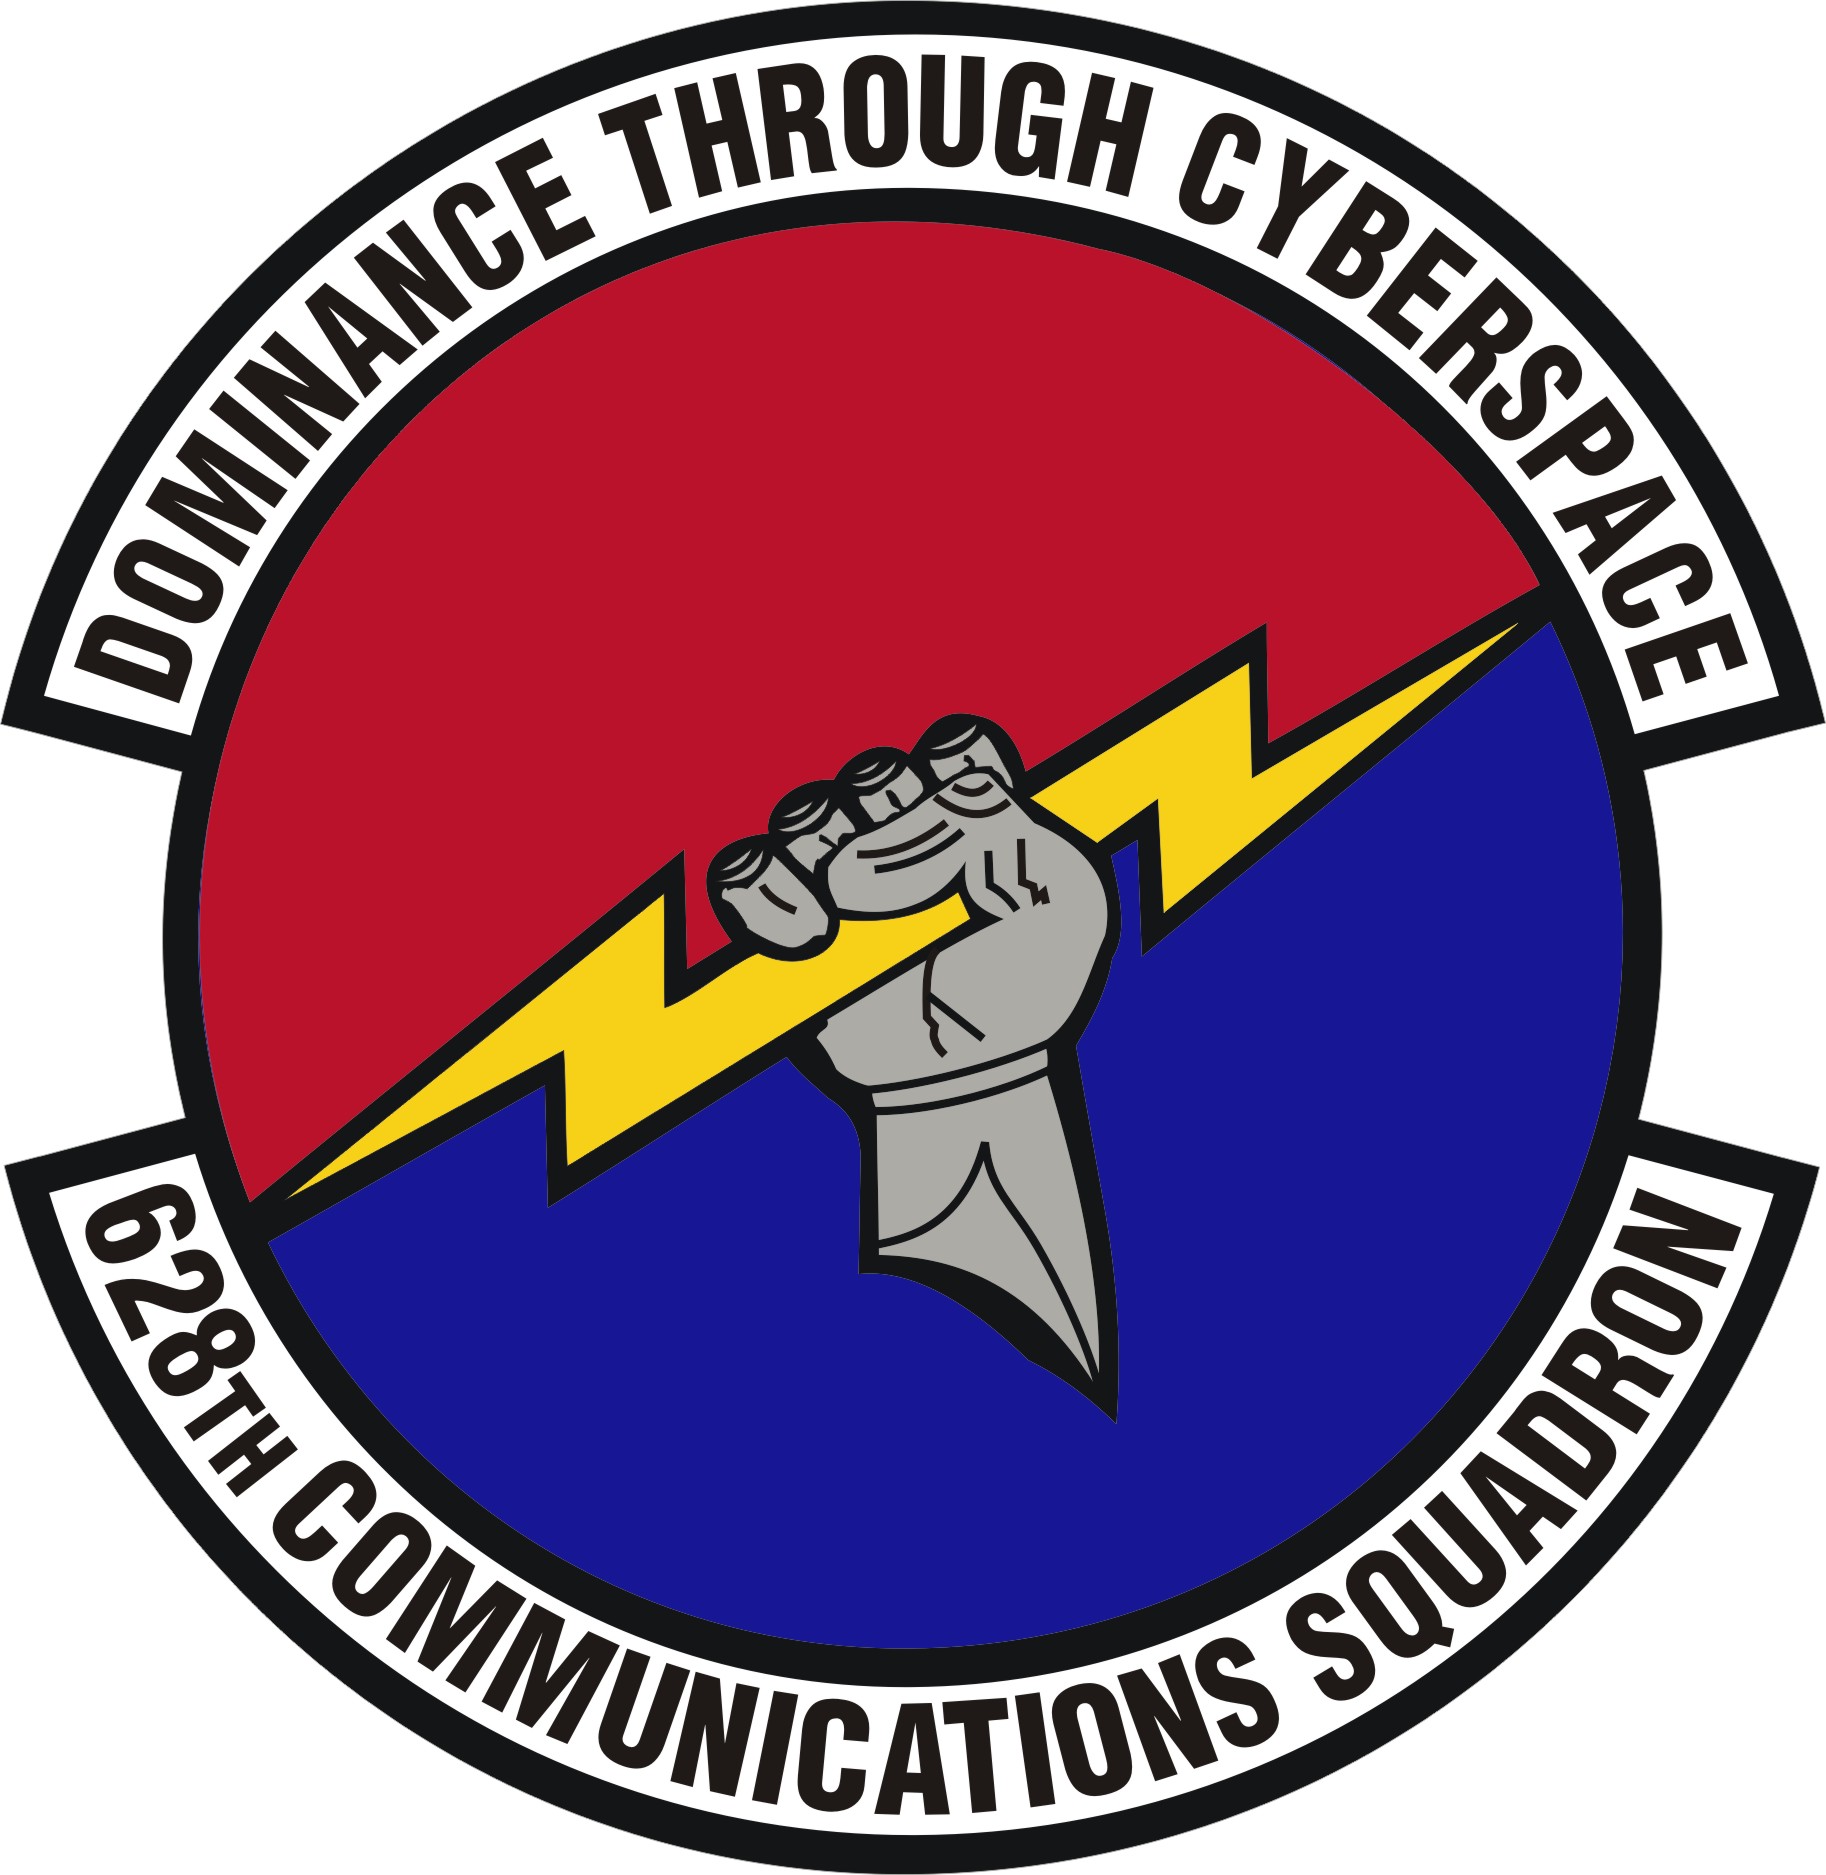 A logo for the 628th Communications Squadron